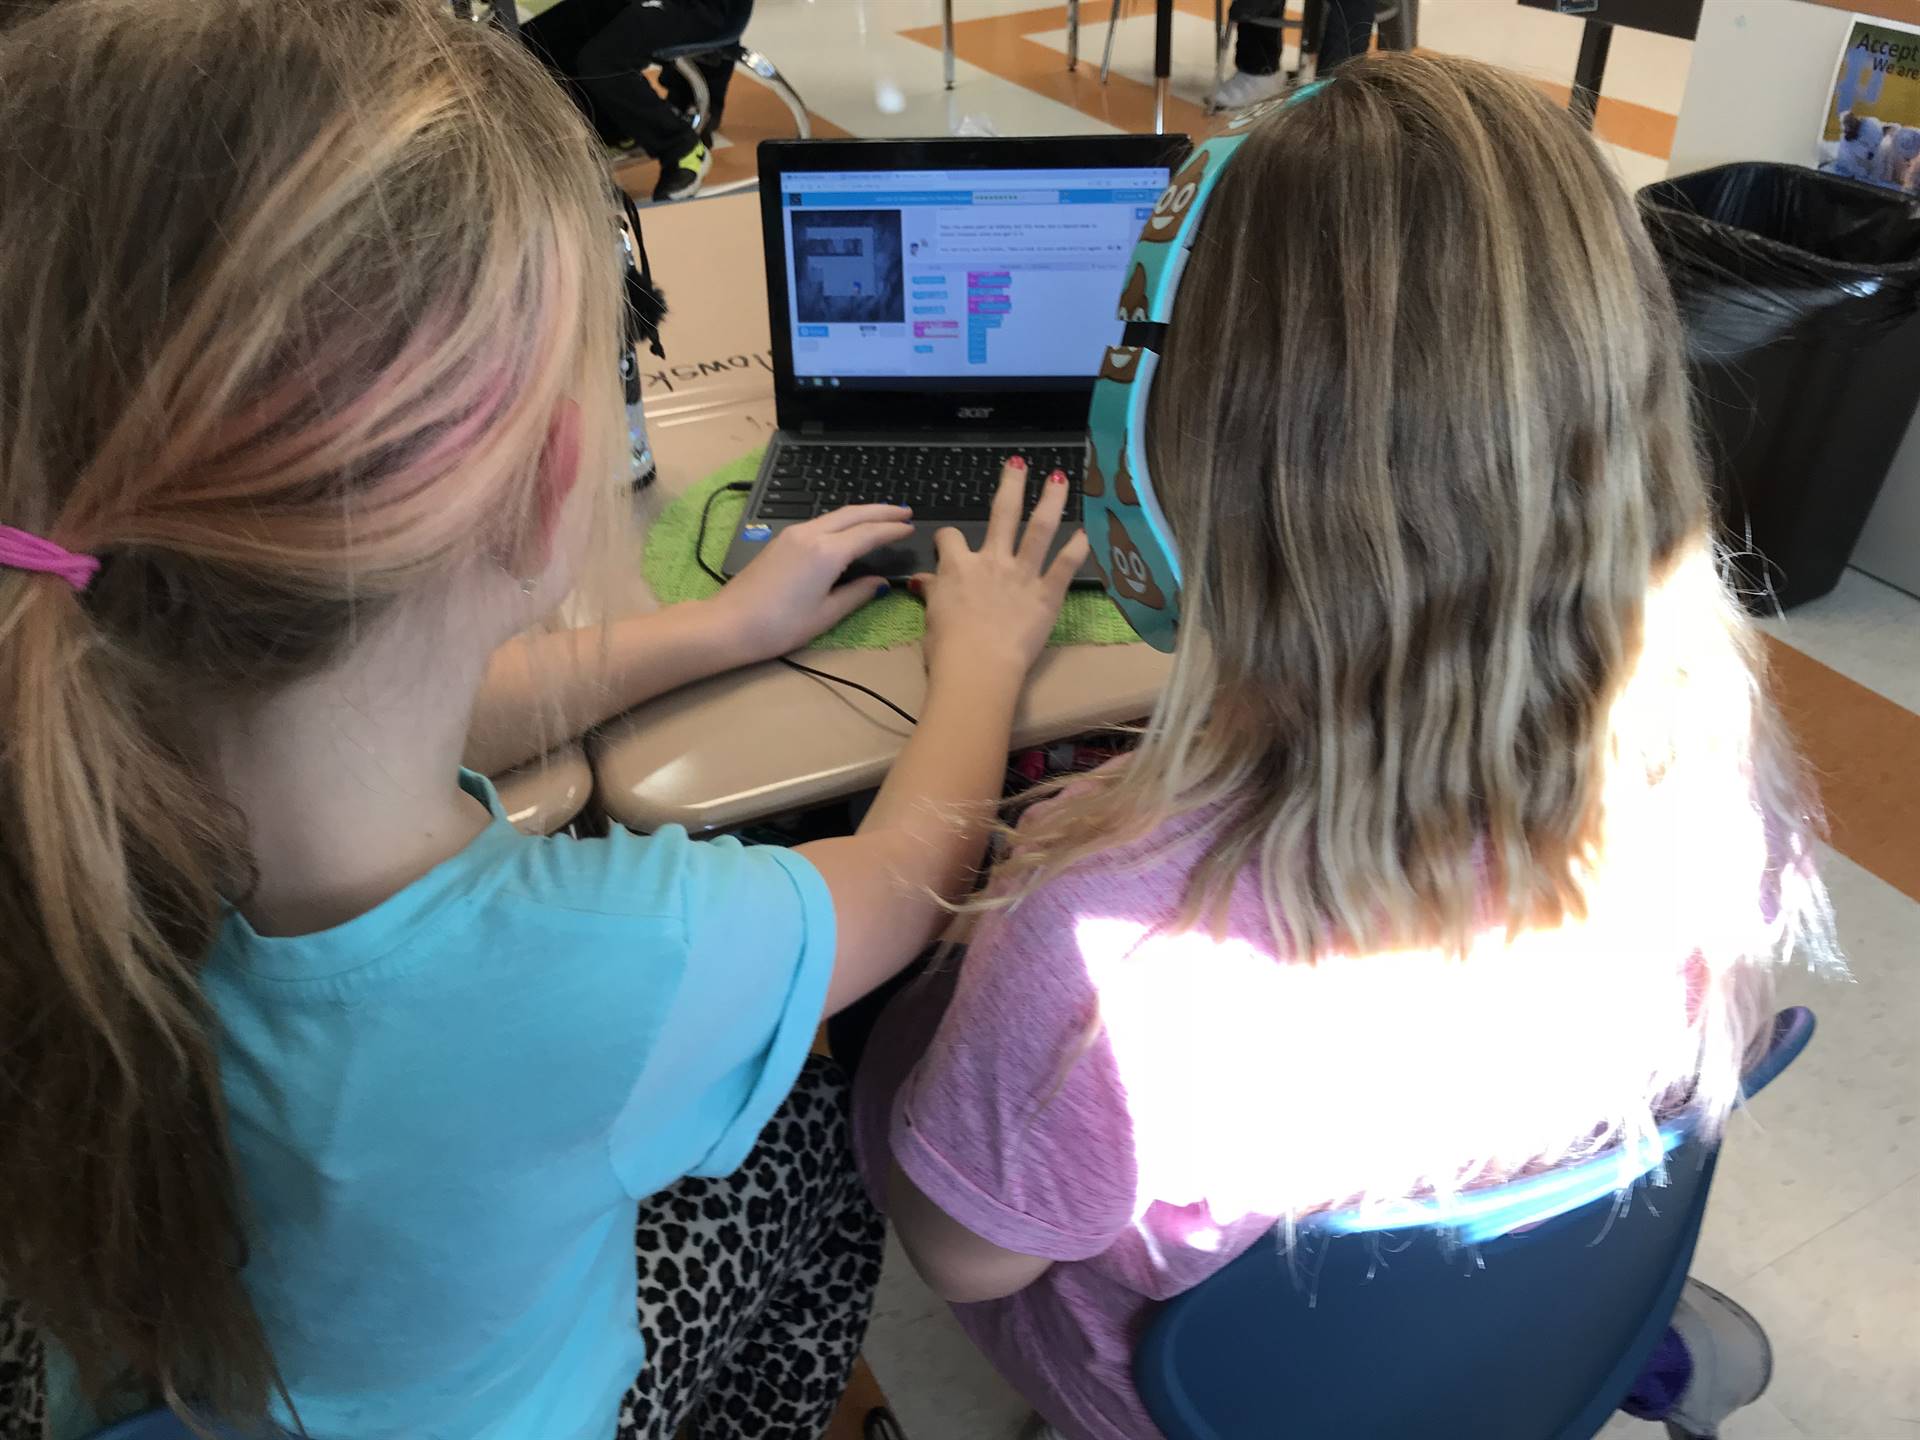 Students collaborate while learning to code.